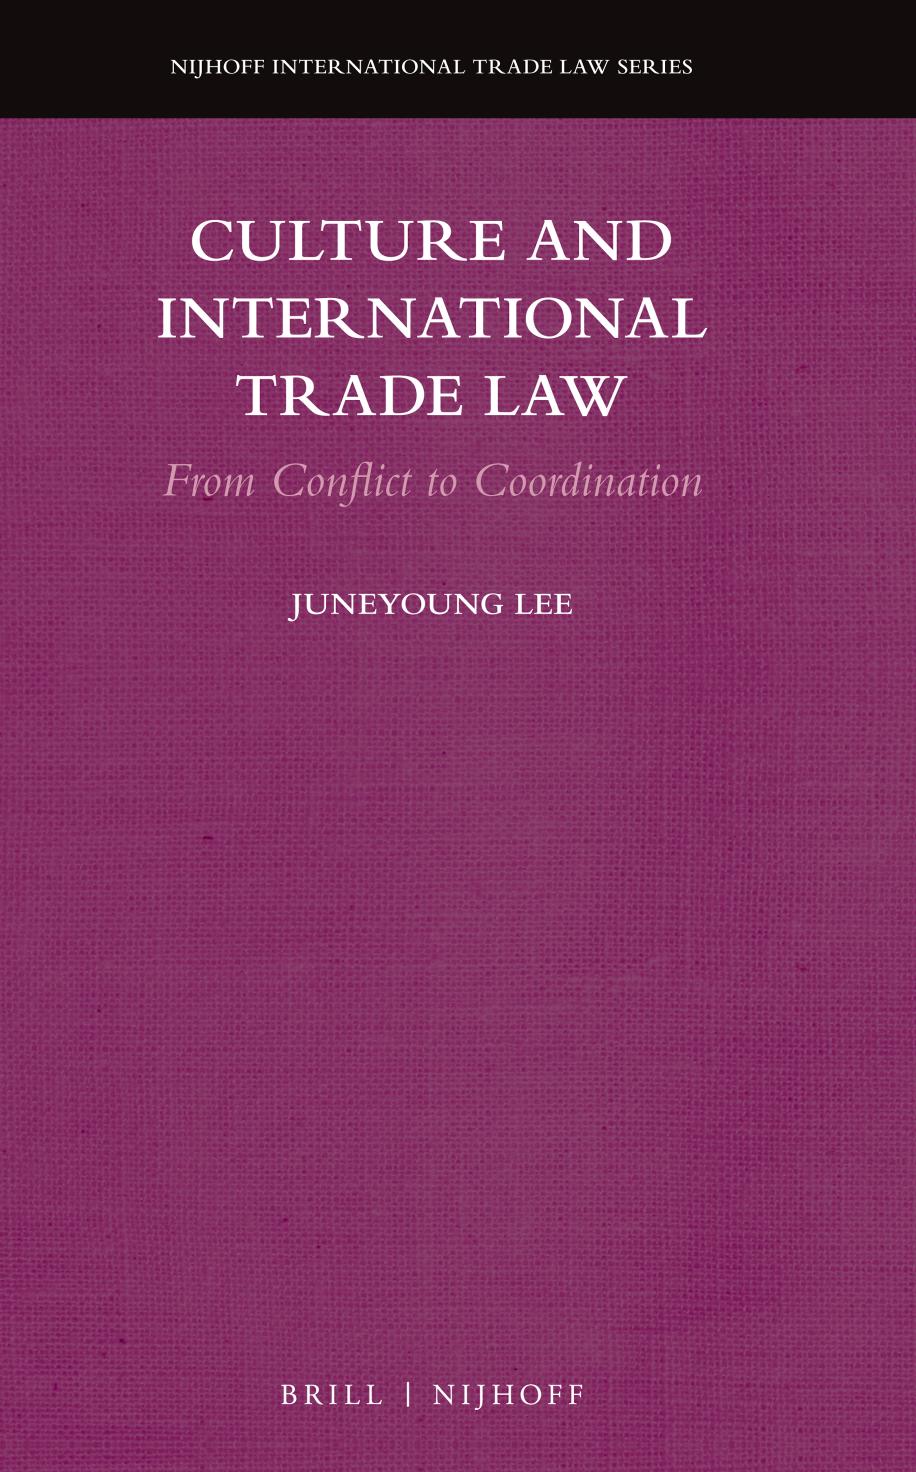 Culture and International Trade Law: From Conflict to Coordination by Juneyoung Lee